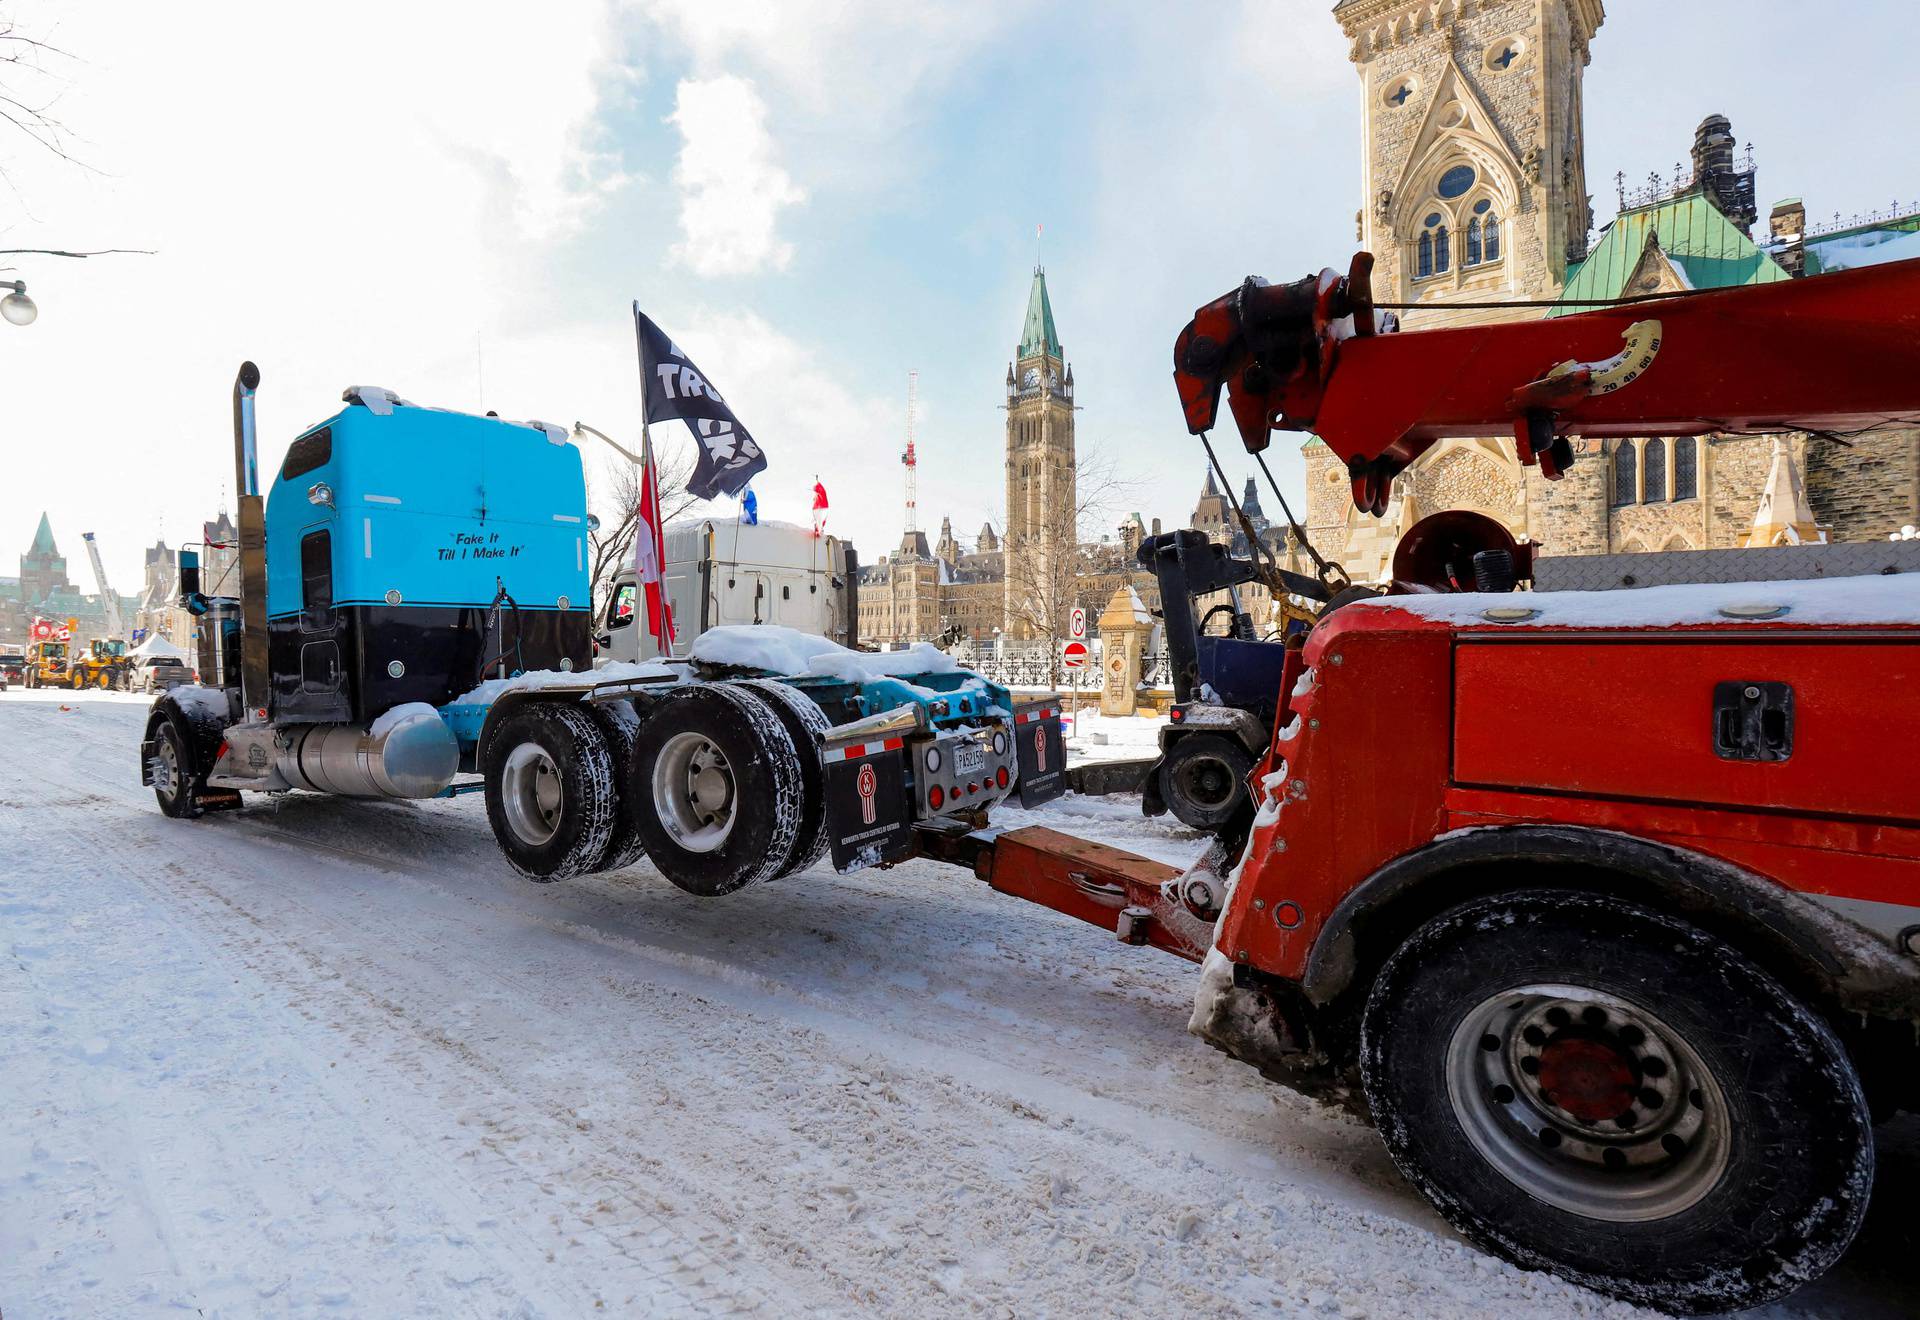 Canadian police work to restore normality to the capital after trucks and demonstrators continue to occupy the downtown core for more than three weeks to protest against pandemic restrictions in Ottawa